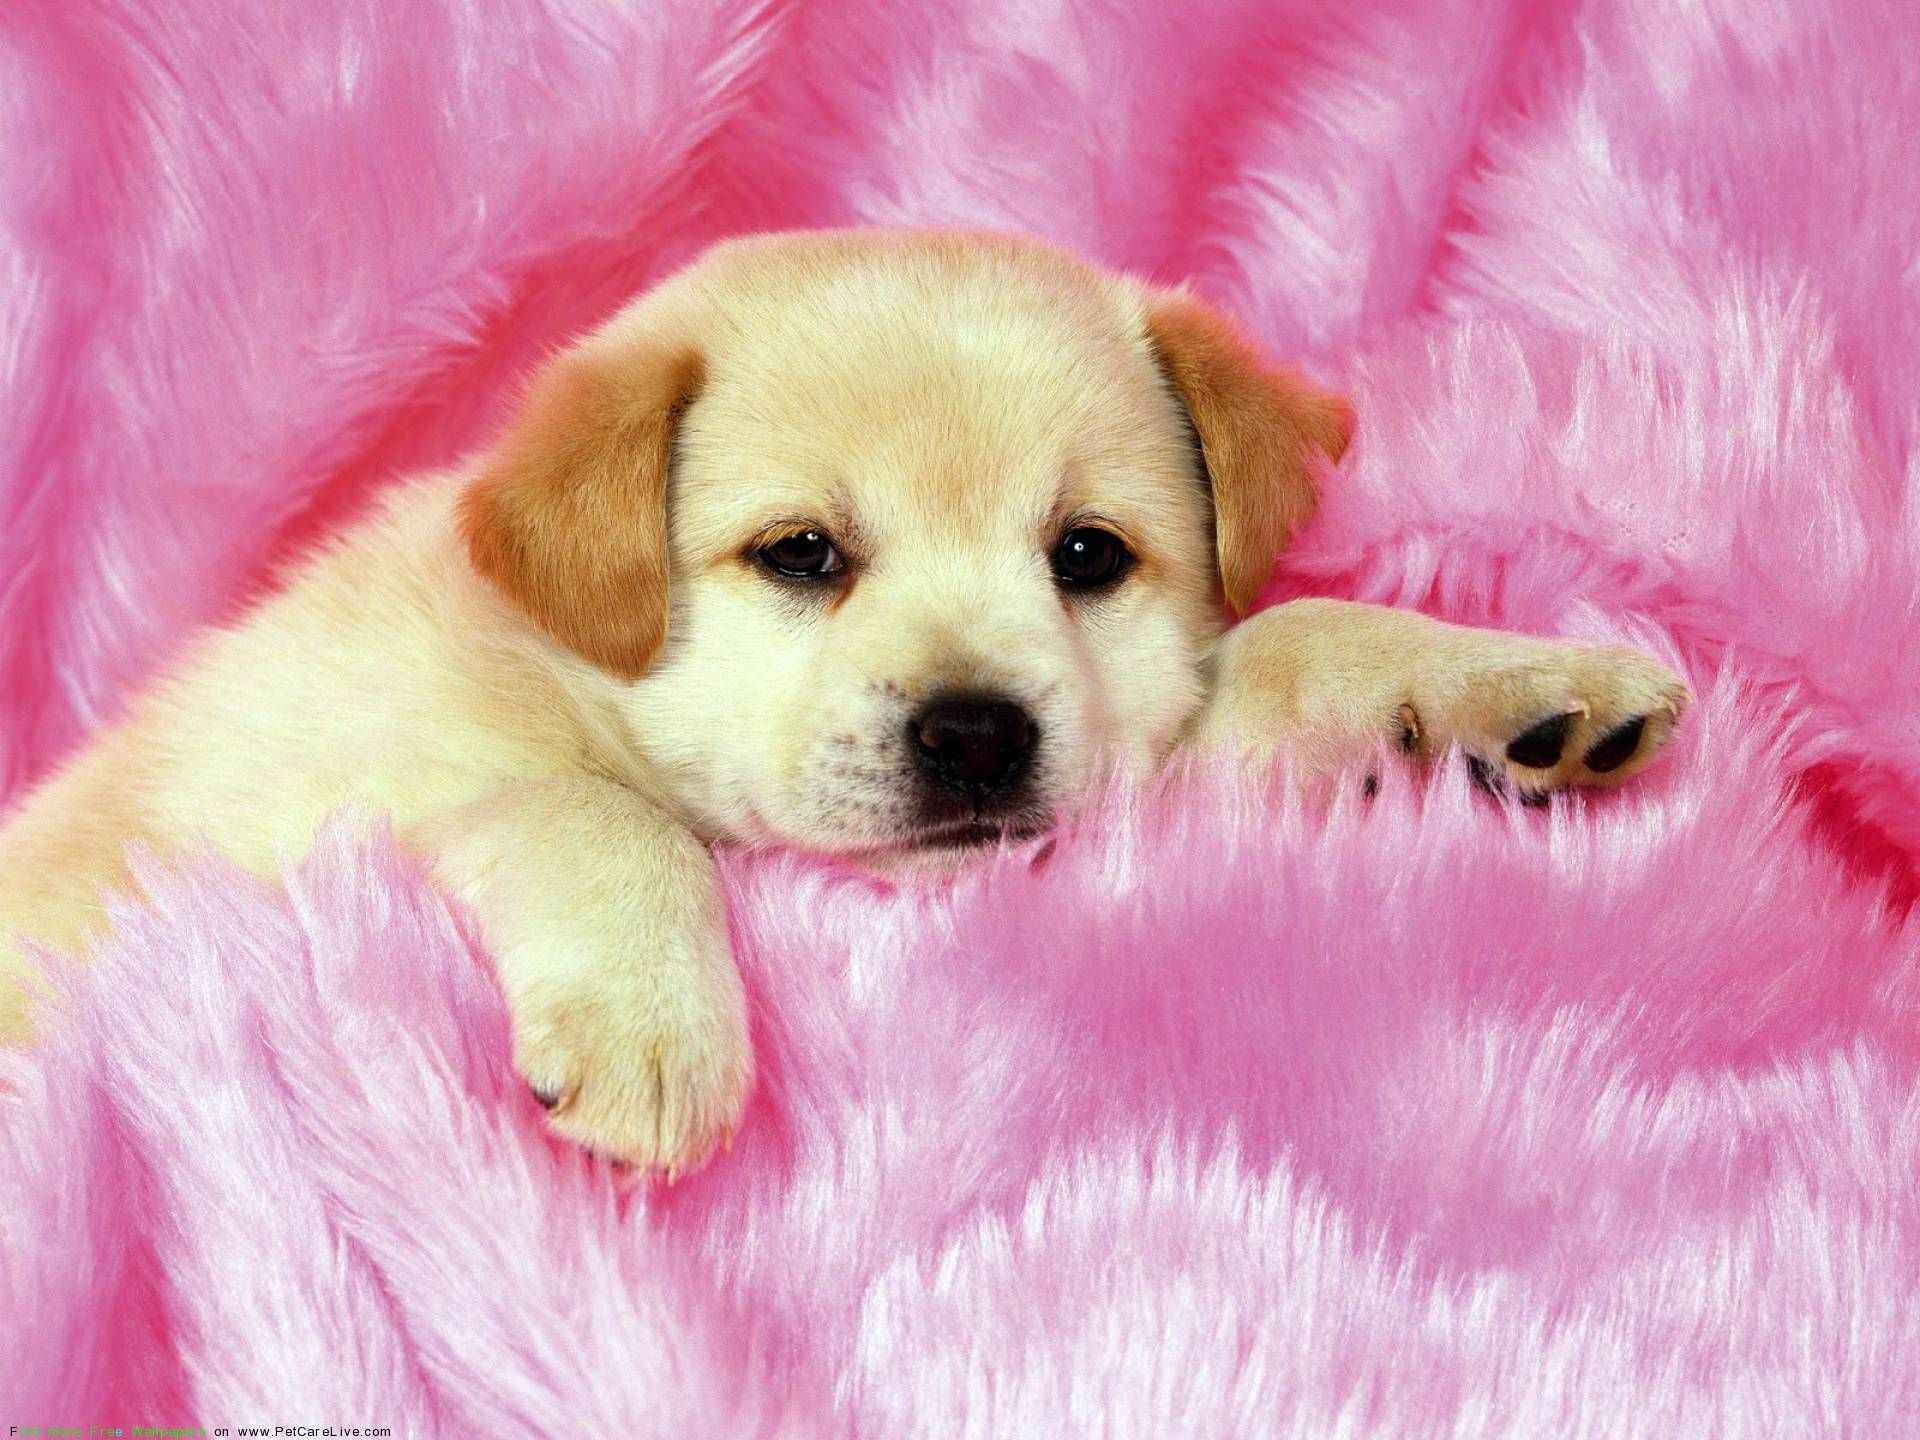 1920x1440 Cute Dogs And Puppies Wallpapers - Wallpaper Cave